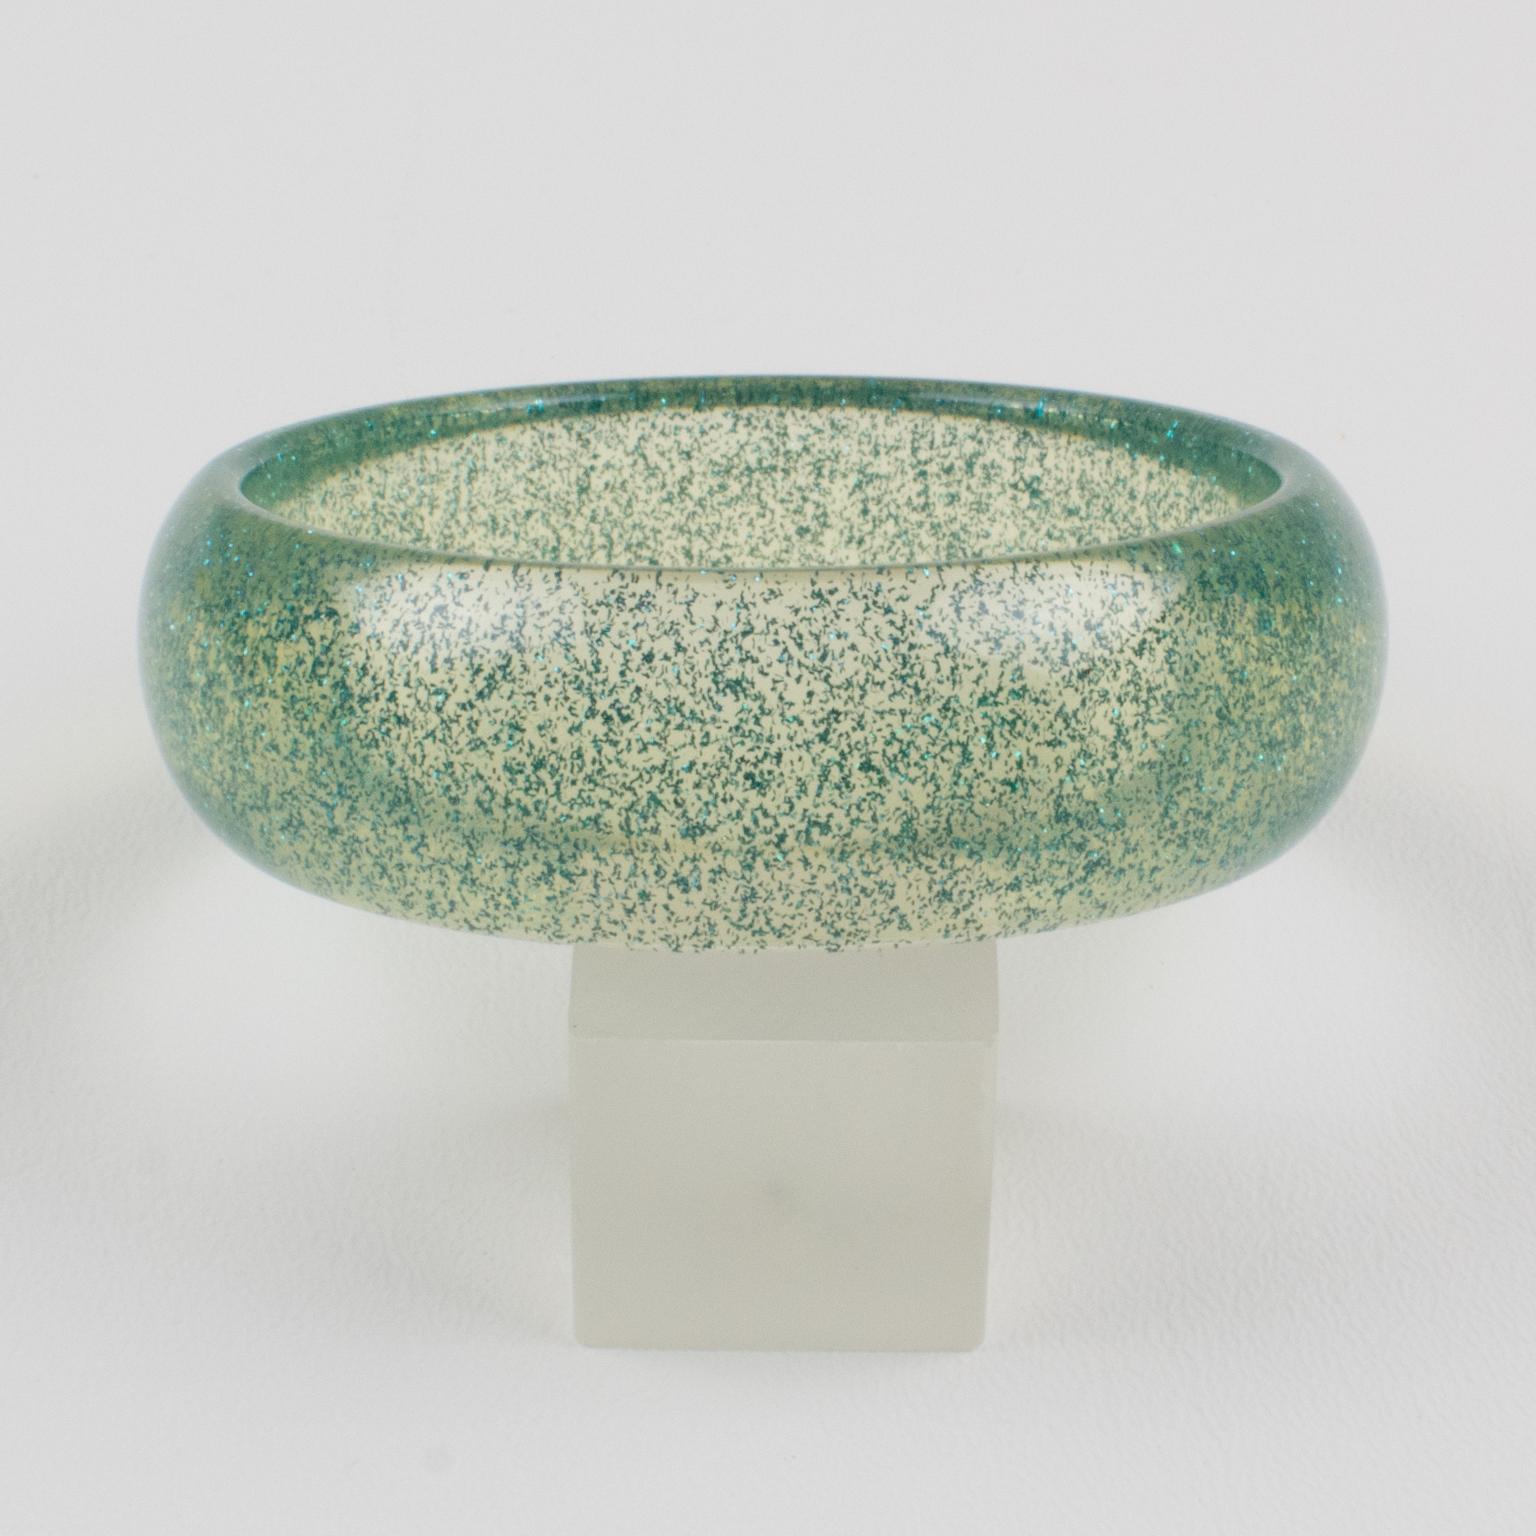 Modern Lucite Bracelet Bangle with Turquoise Metallic Confetti Inclusions